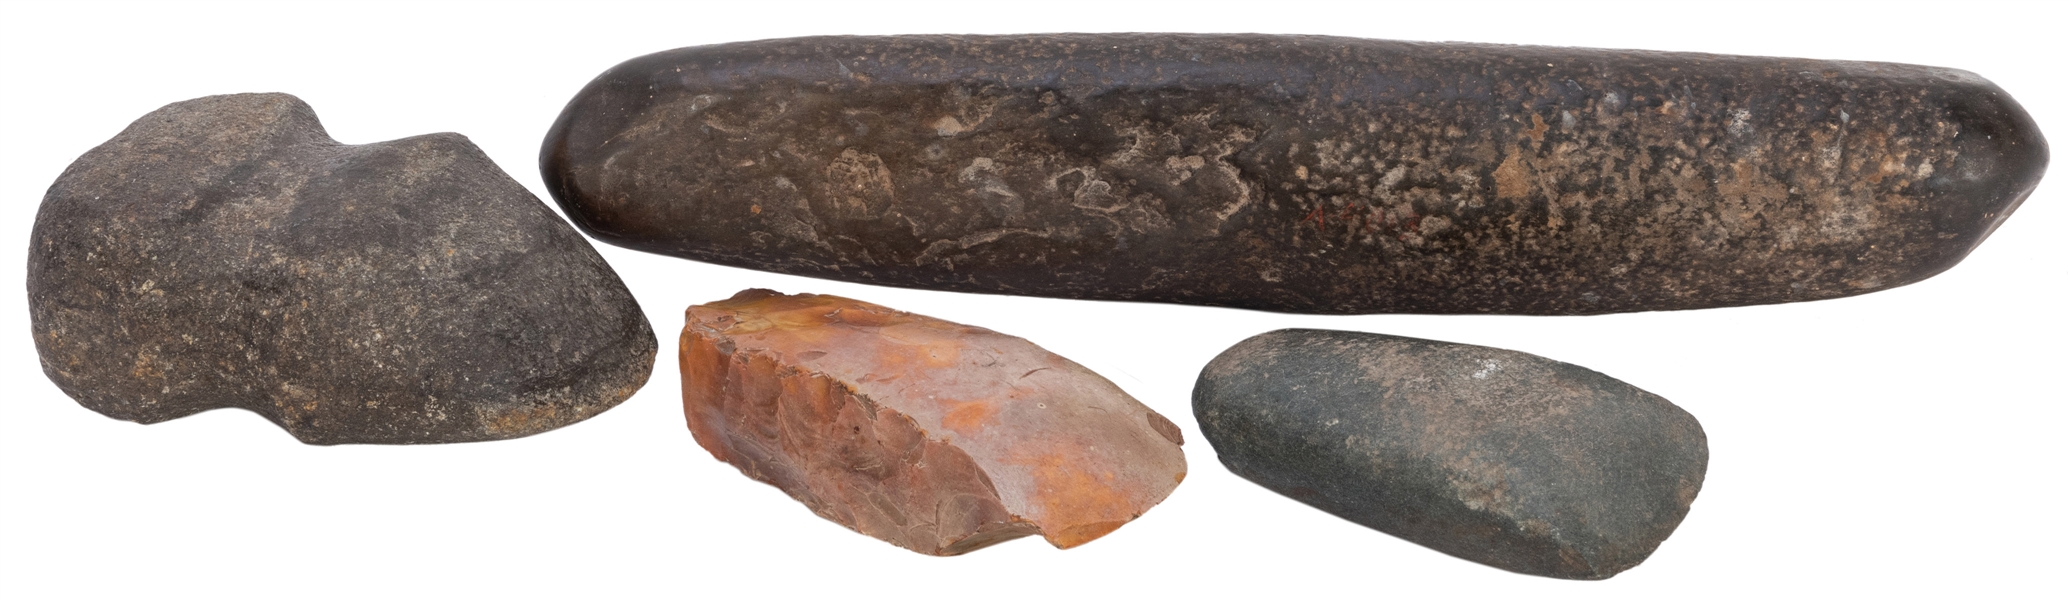  [Prehistoric-Native American] Group of Paleo-Indian Stone T...